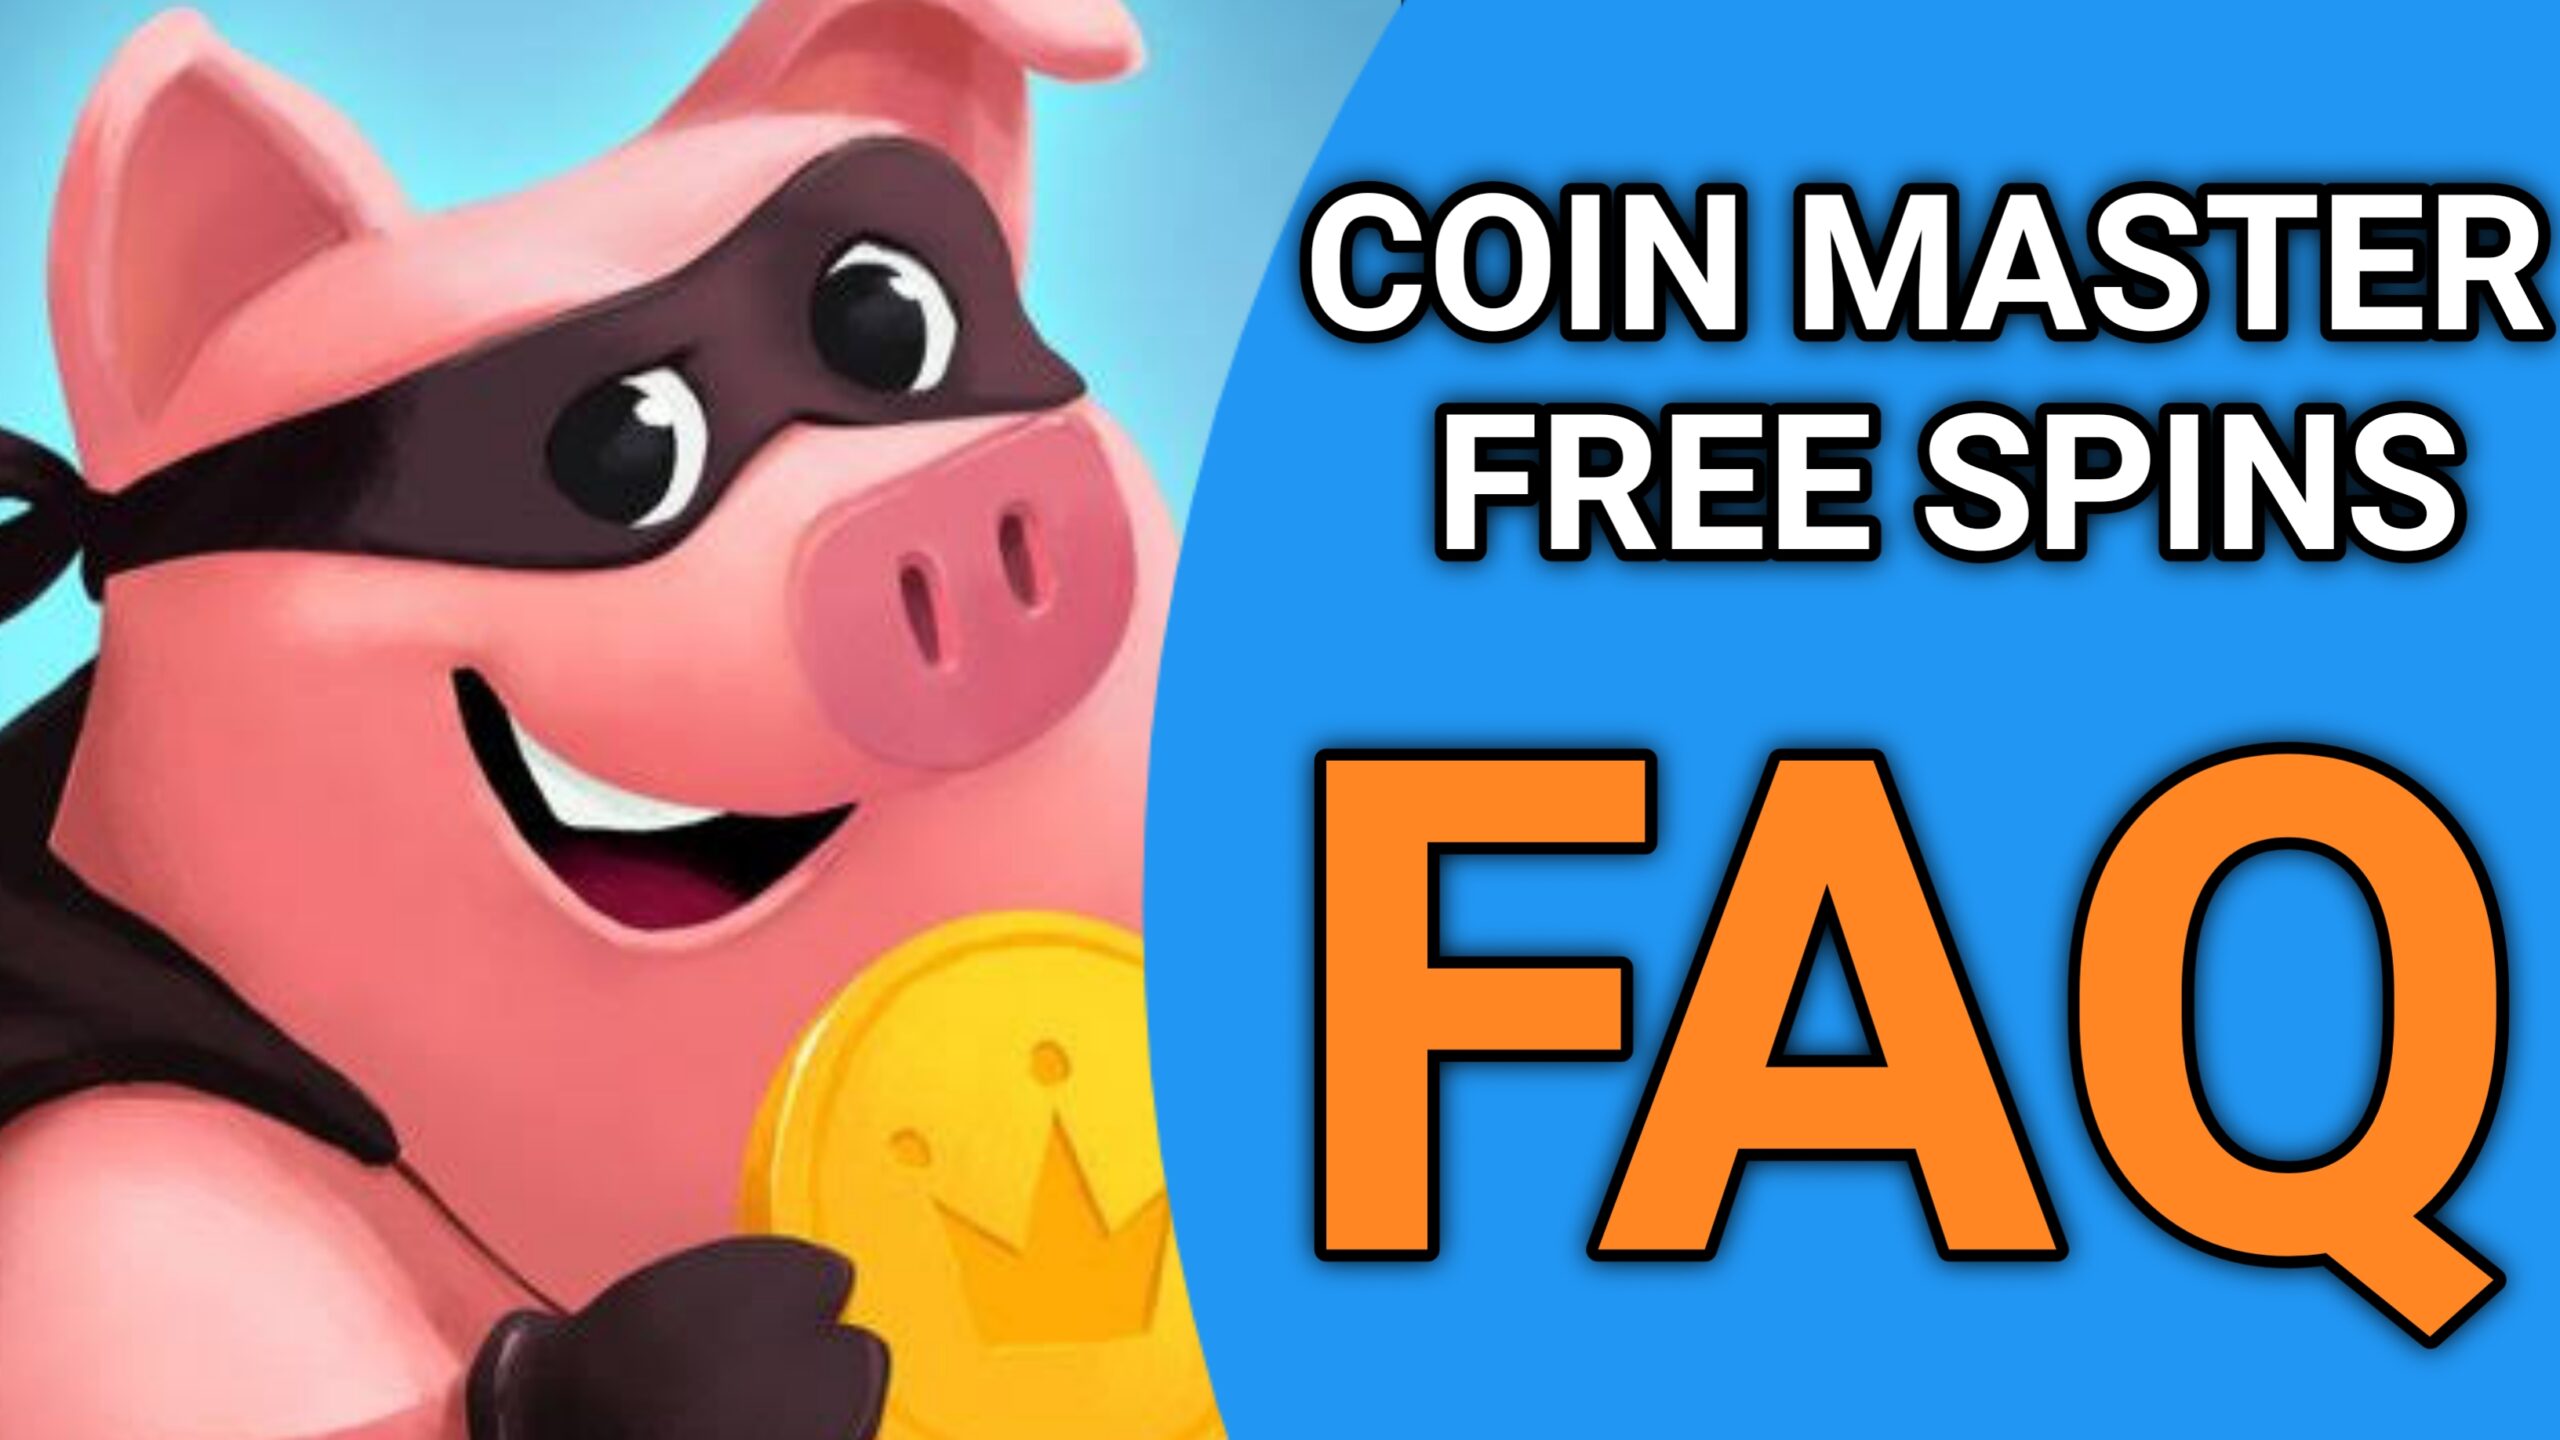 Coin Master Free Spins 